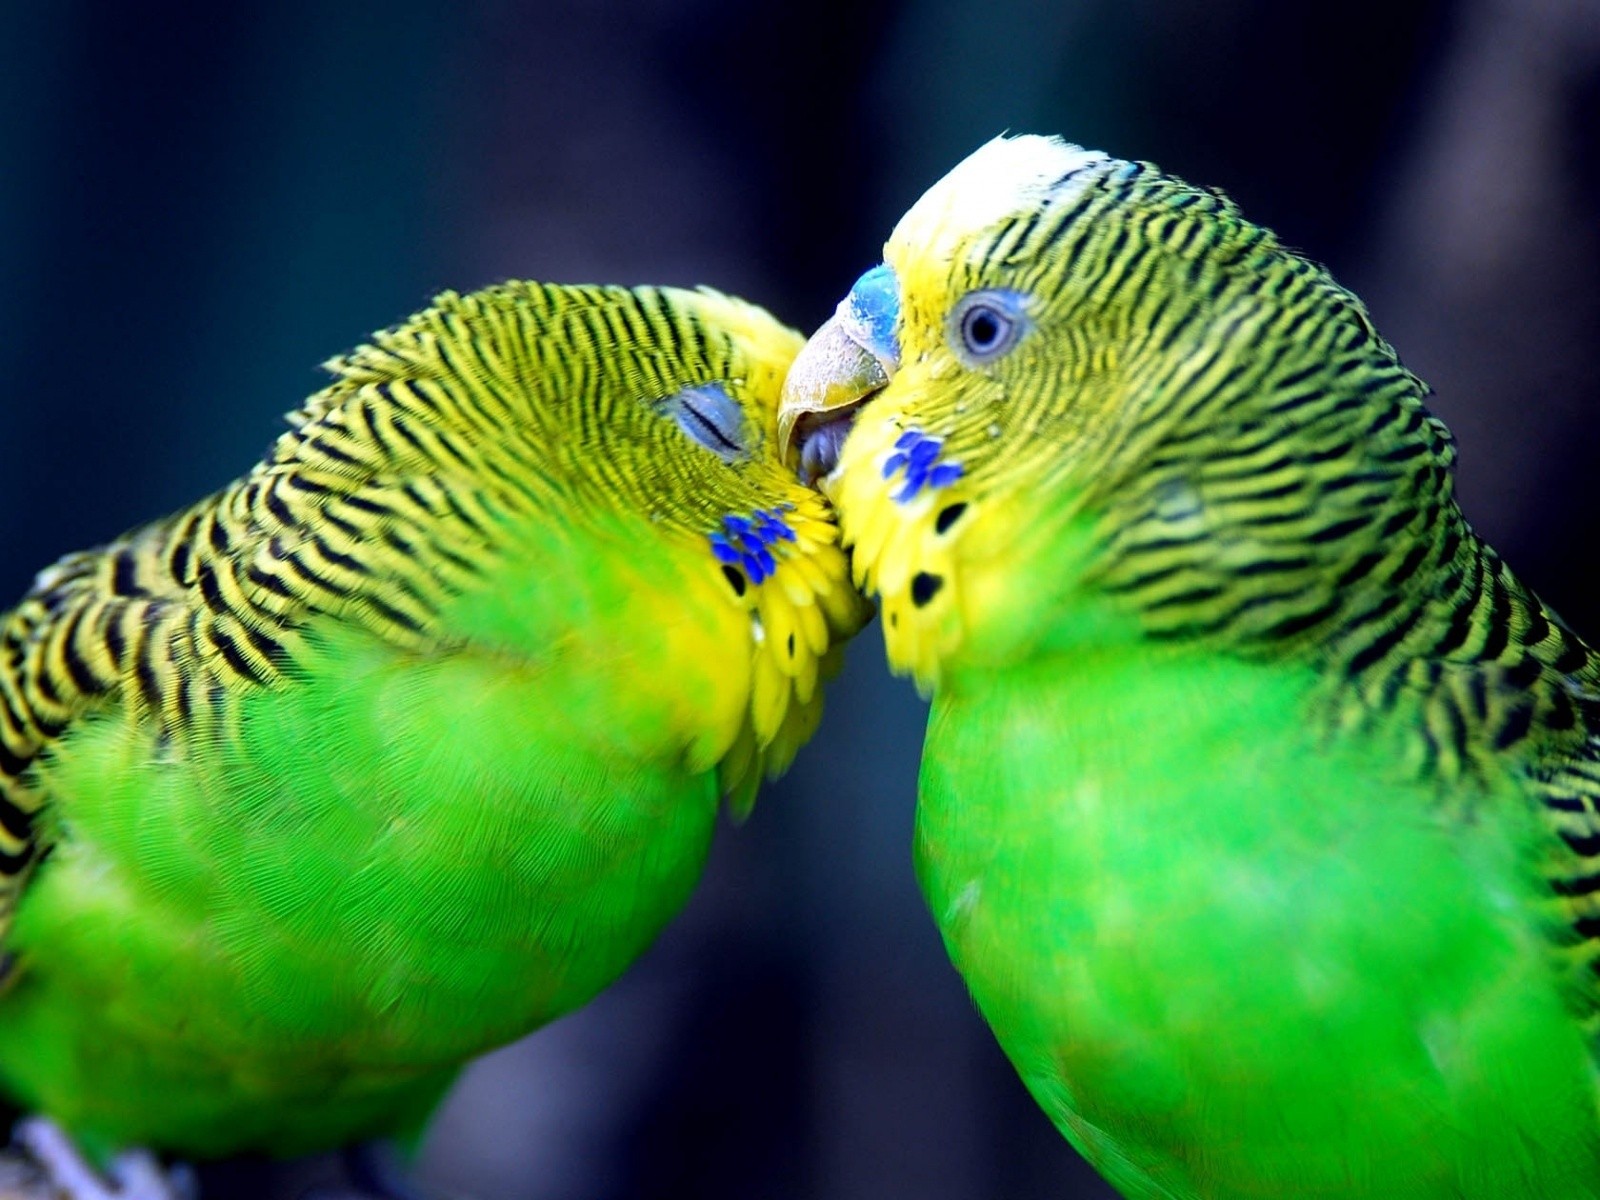 All Wallpapers Parrot Hd Wallpapers 2 1600x1200